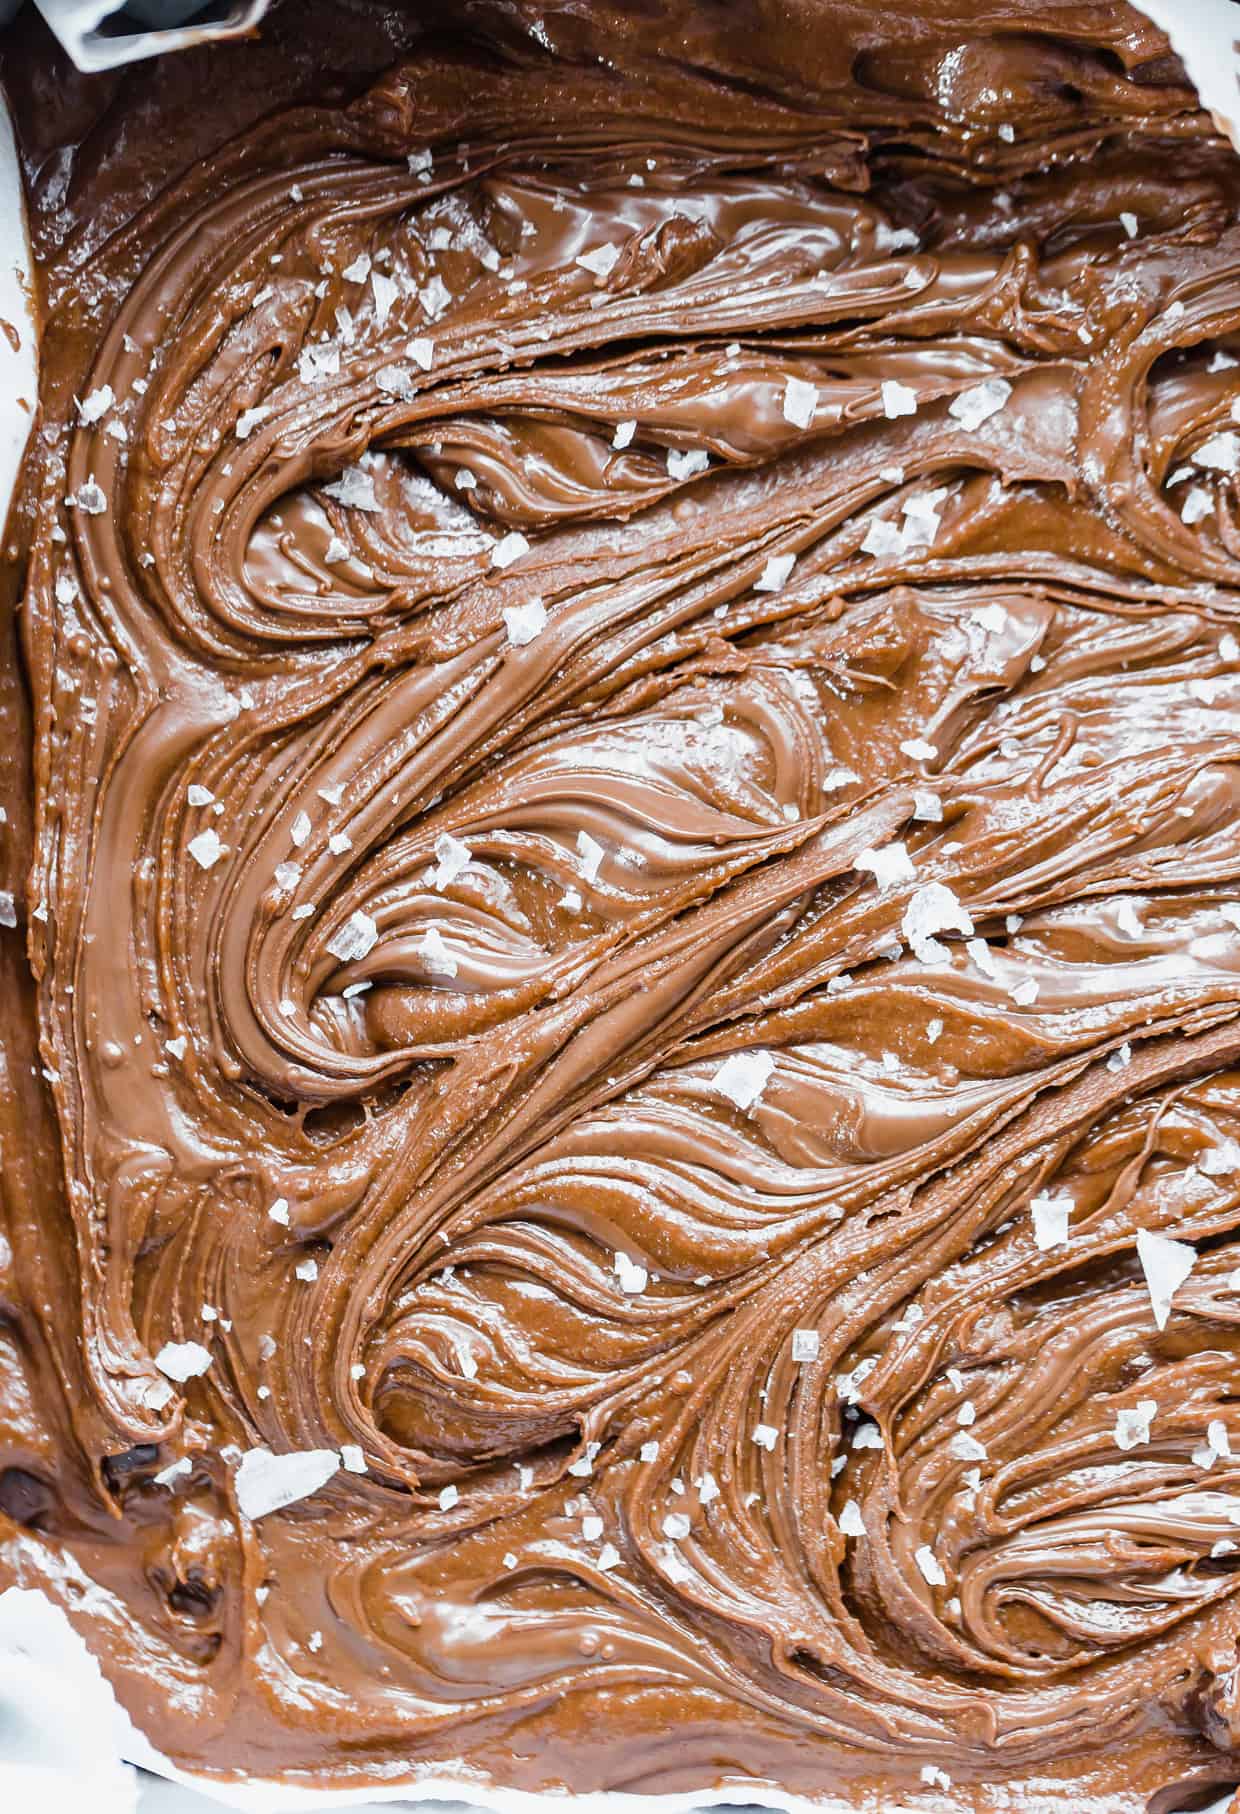 Nutella Brownies with Nutella swirled into the unbaked batter, with a sprinkle of flaky sea salt on the surface.